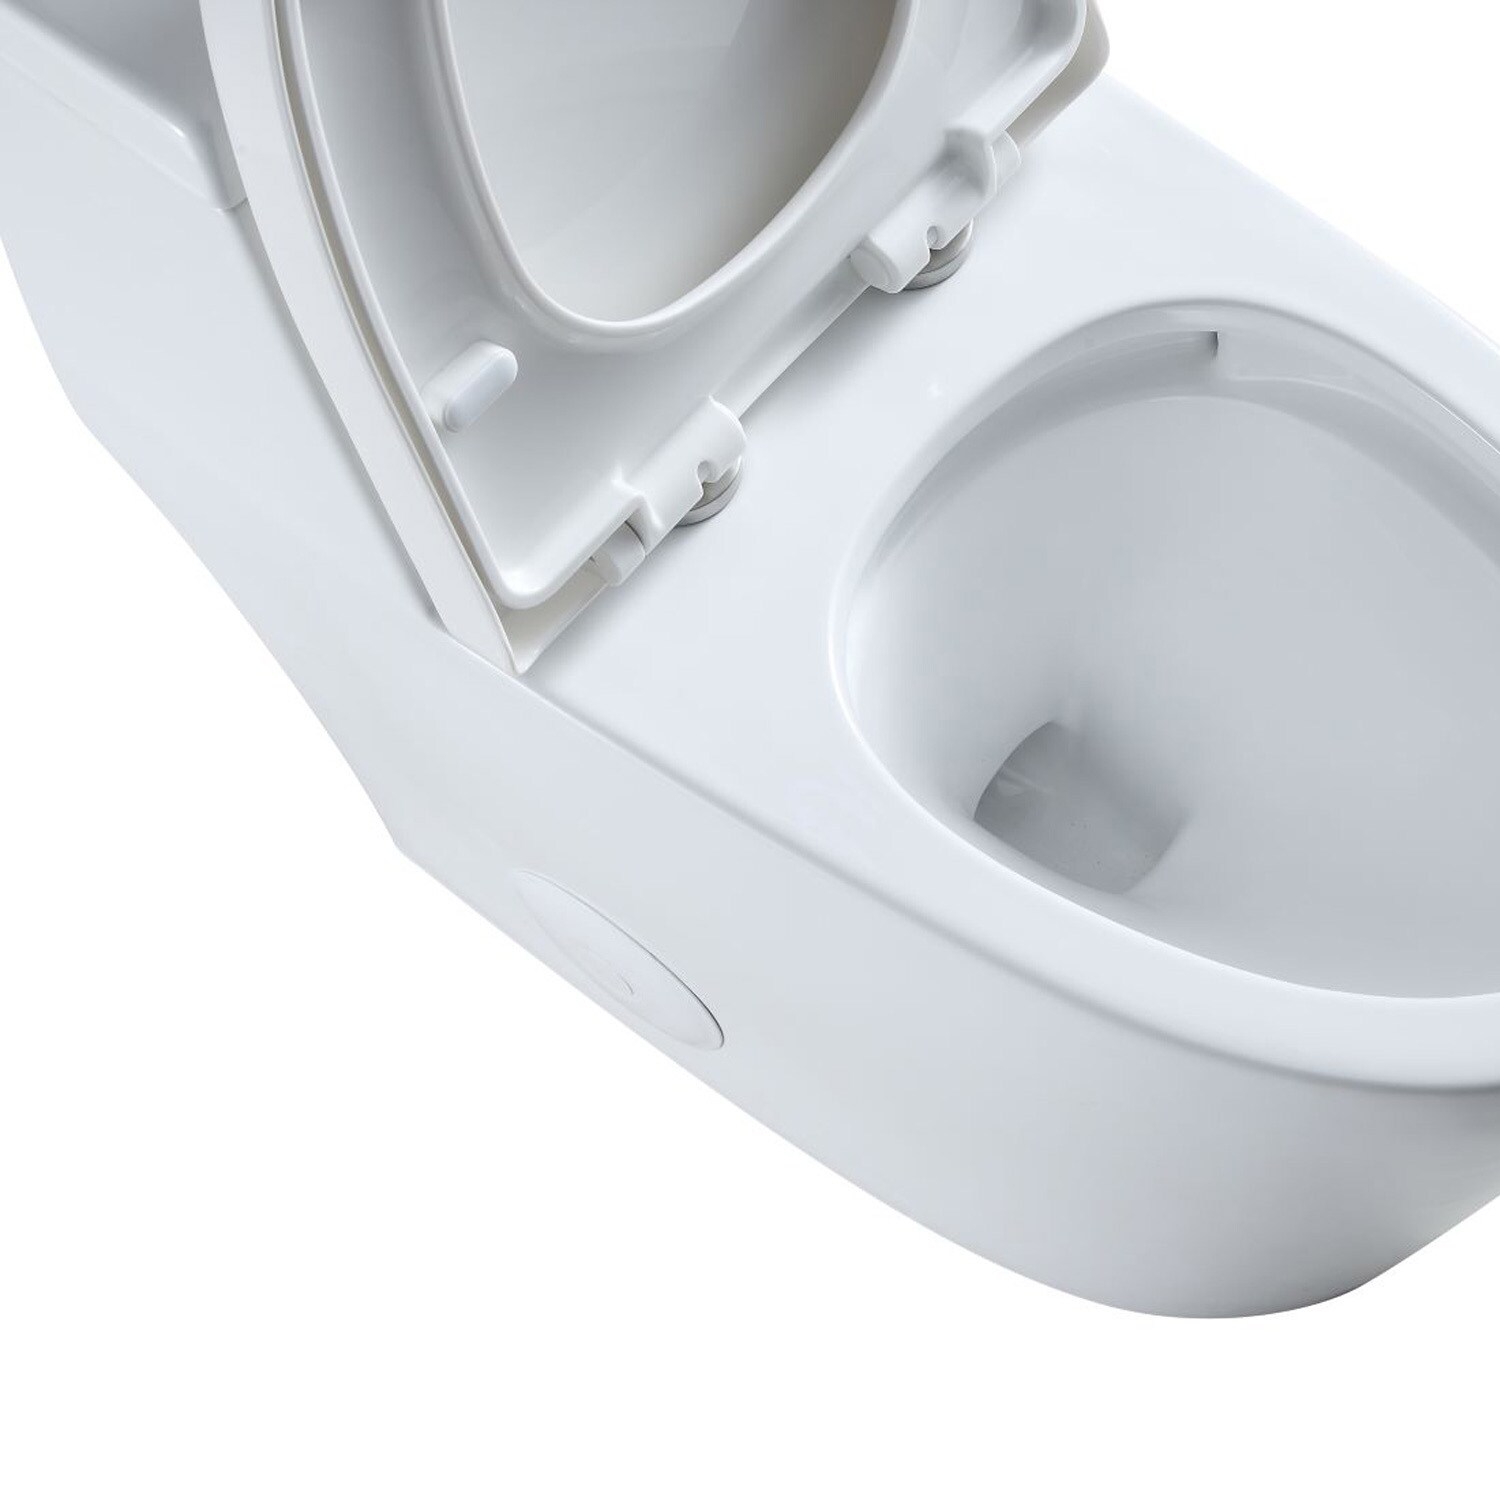 Ung dame Begå underslæb Synslinie Maincraft White Dual Flush Elongated Standard Height WaterSense Soft Close  Toilet 12-in Rough-In 1-GPF in the Toilets department at Lowes.com